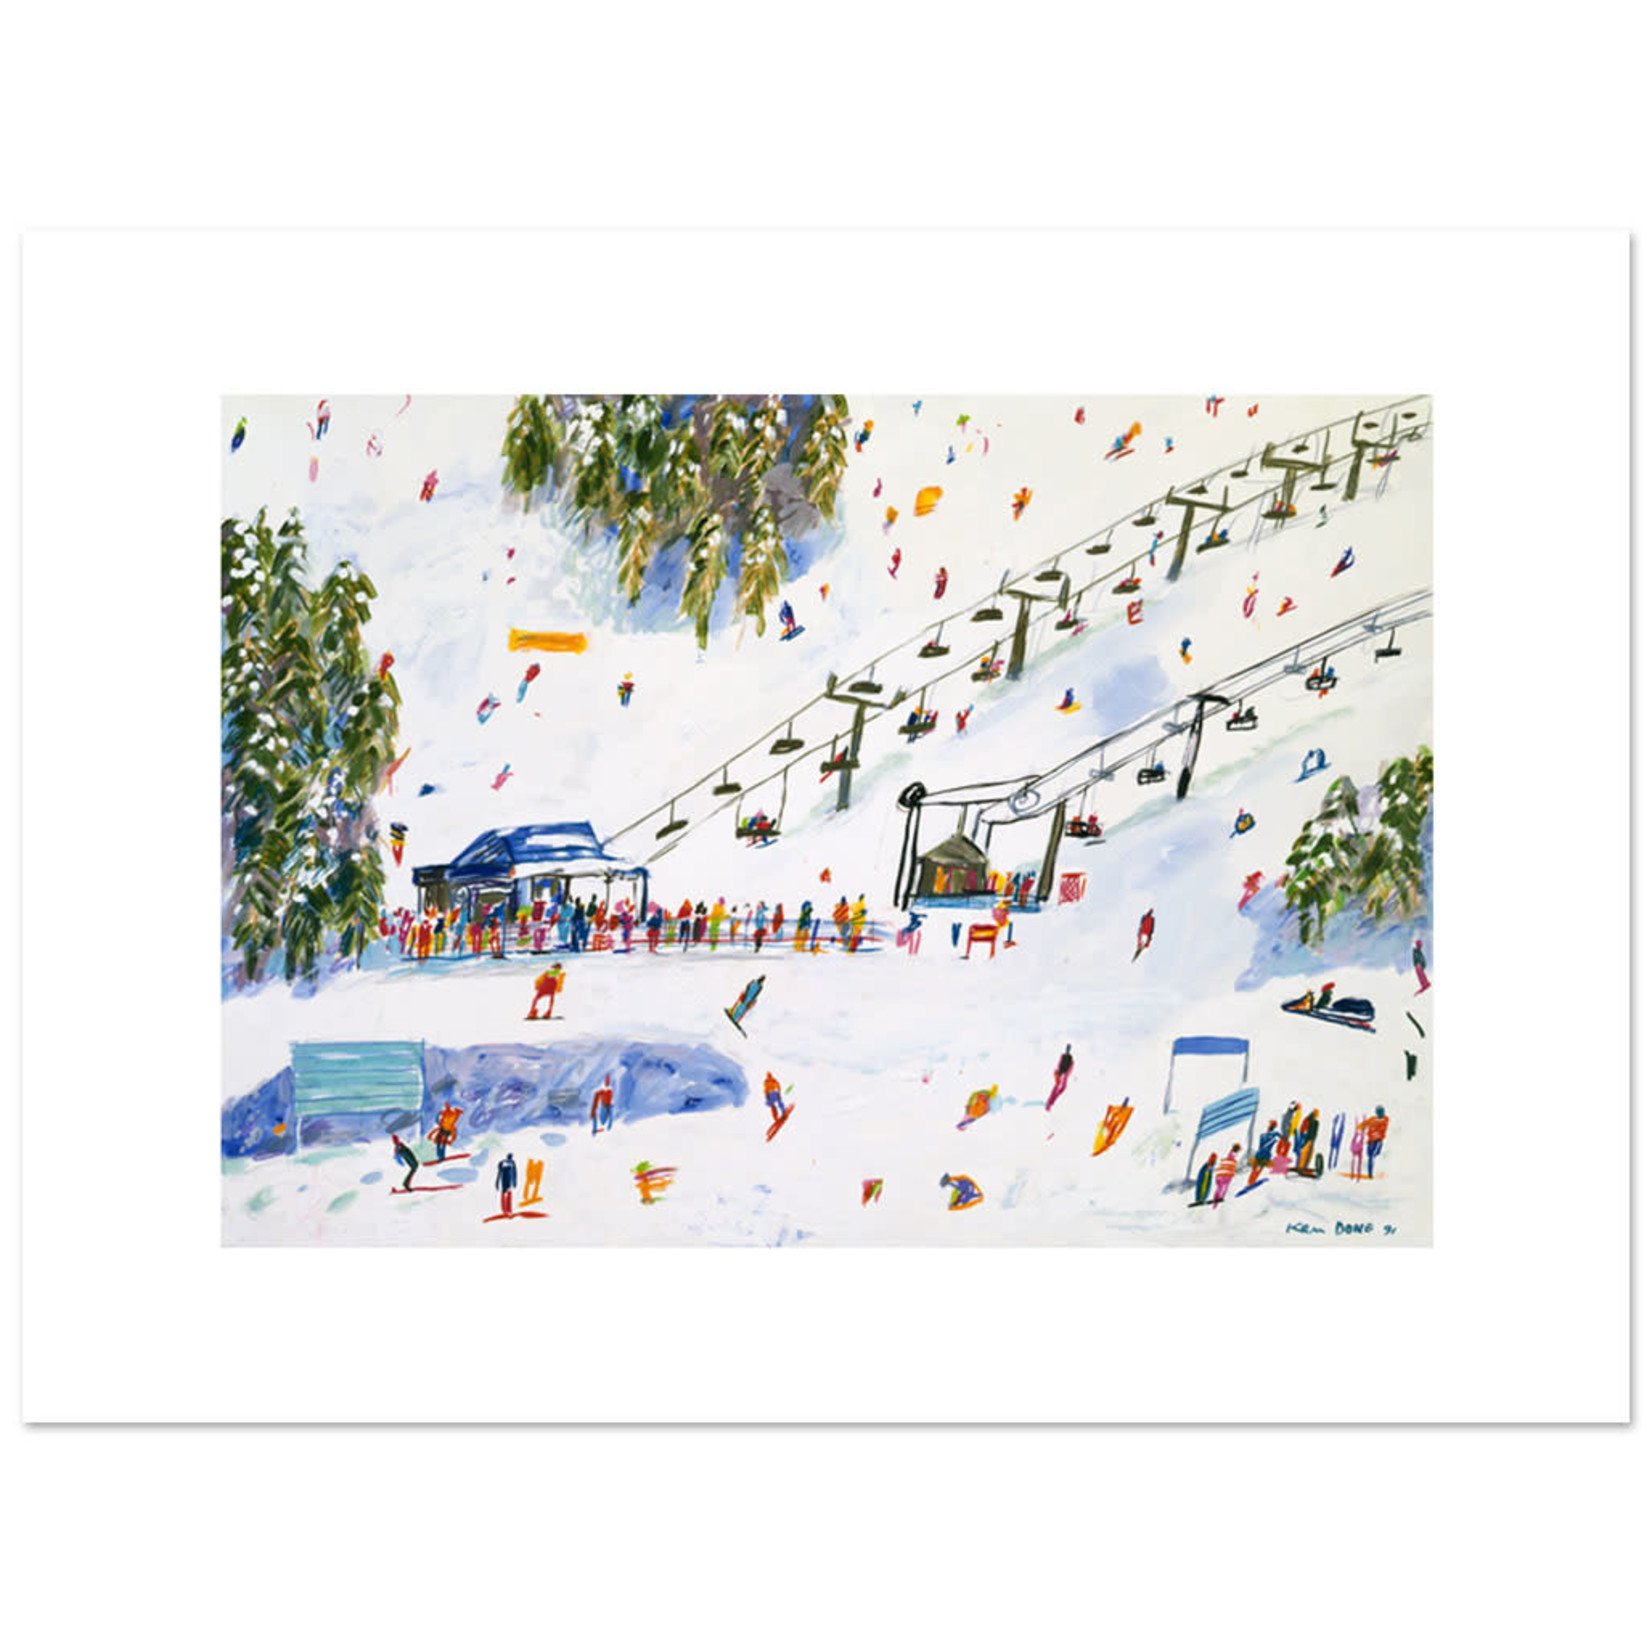 Limited Edition Prints On the slopes, 1991